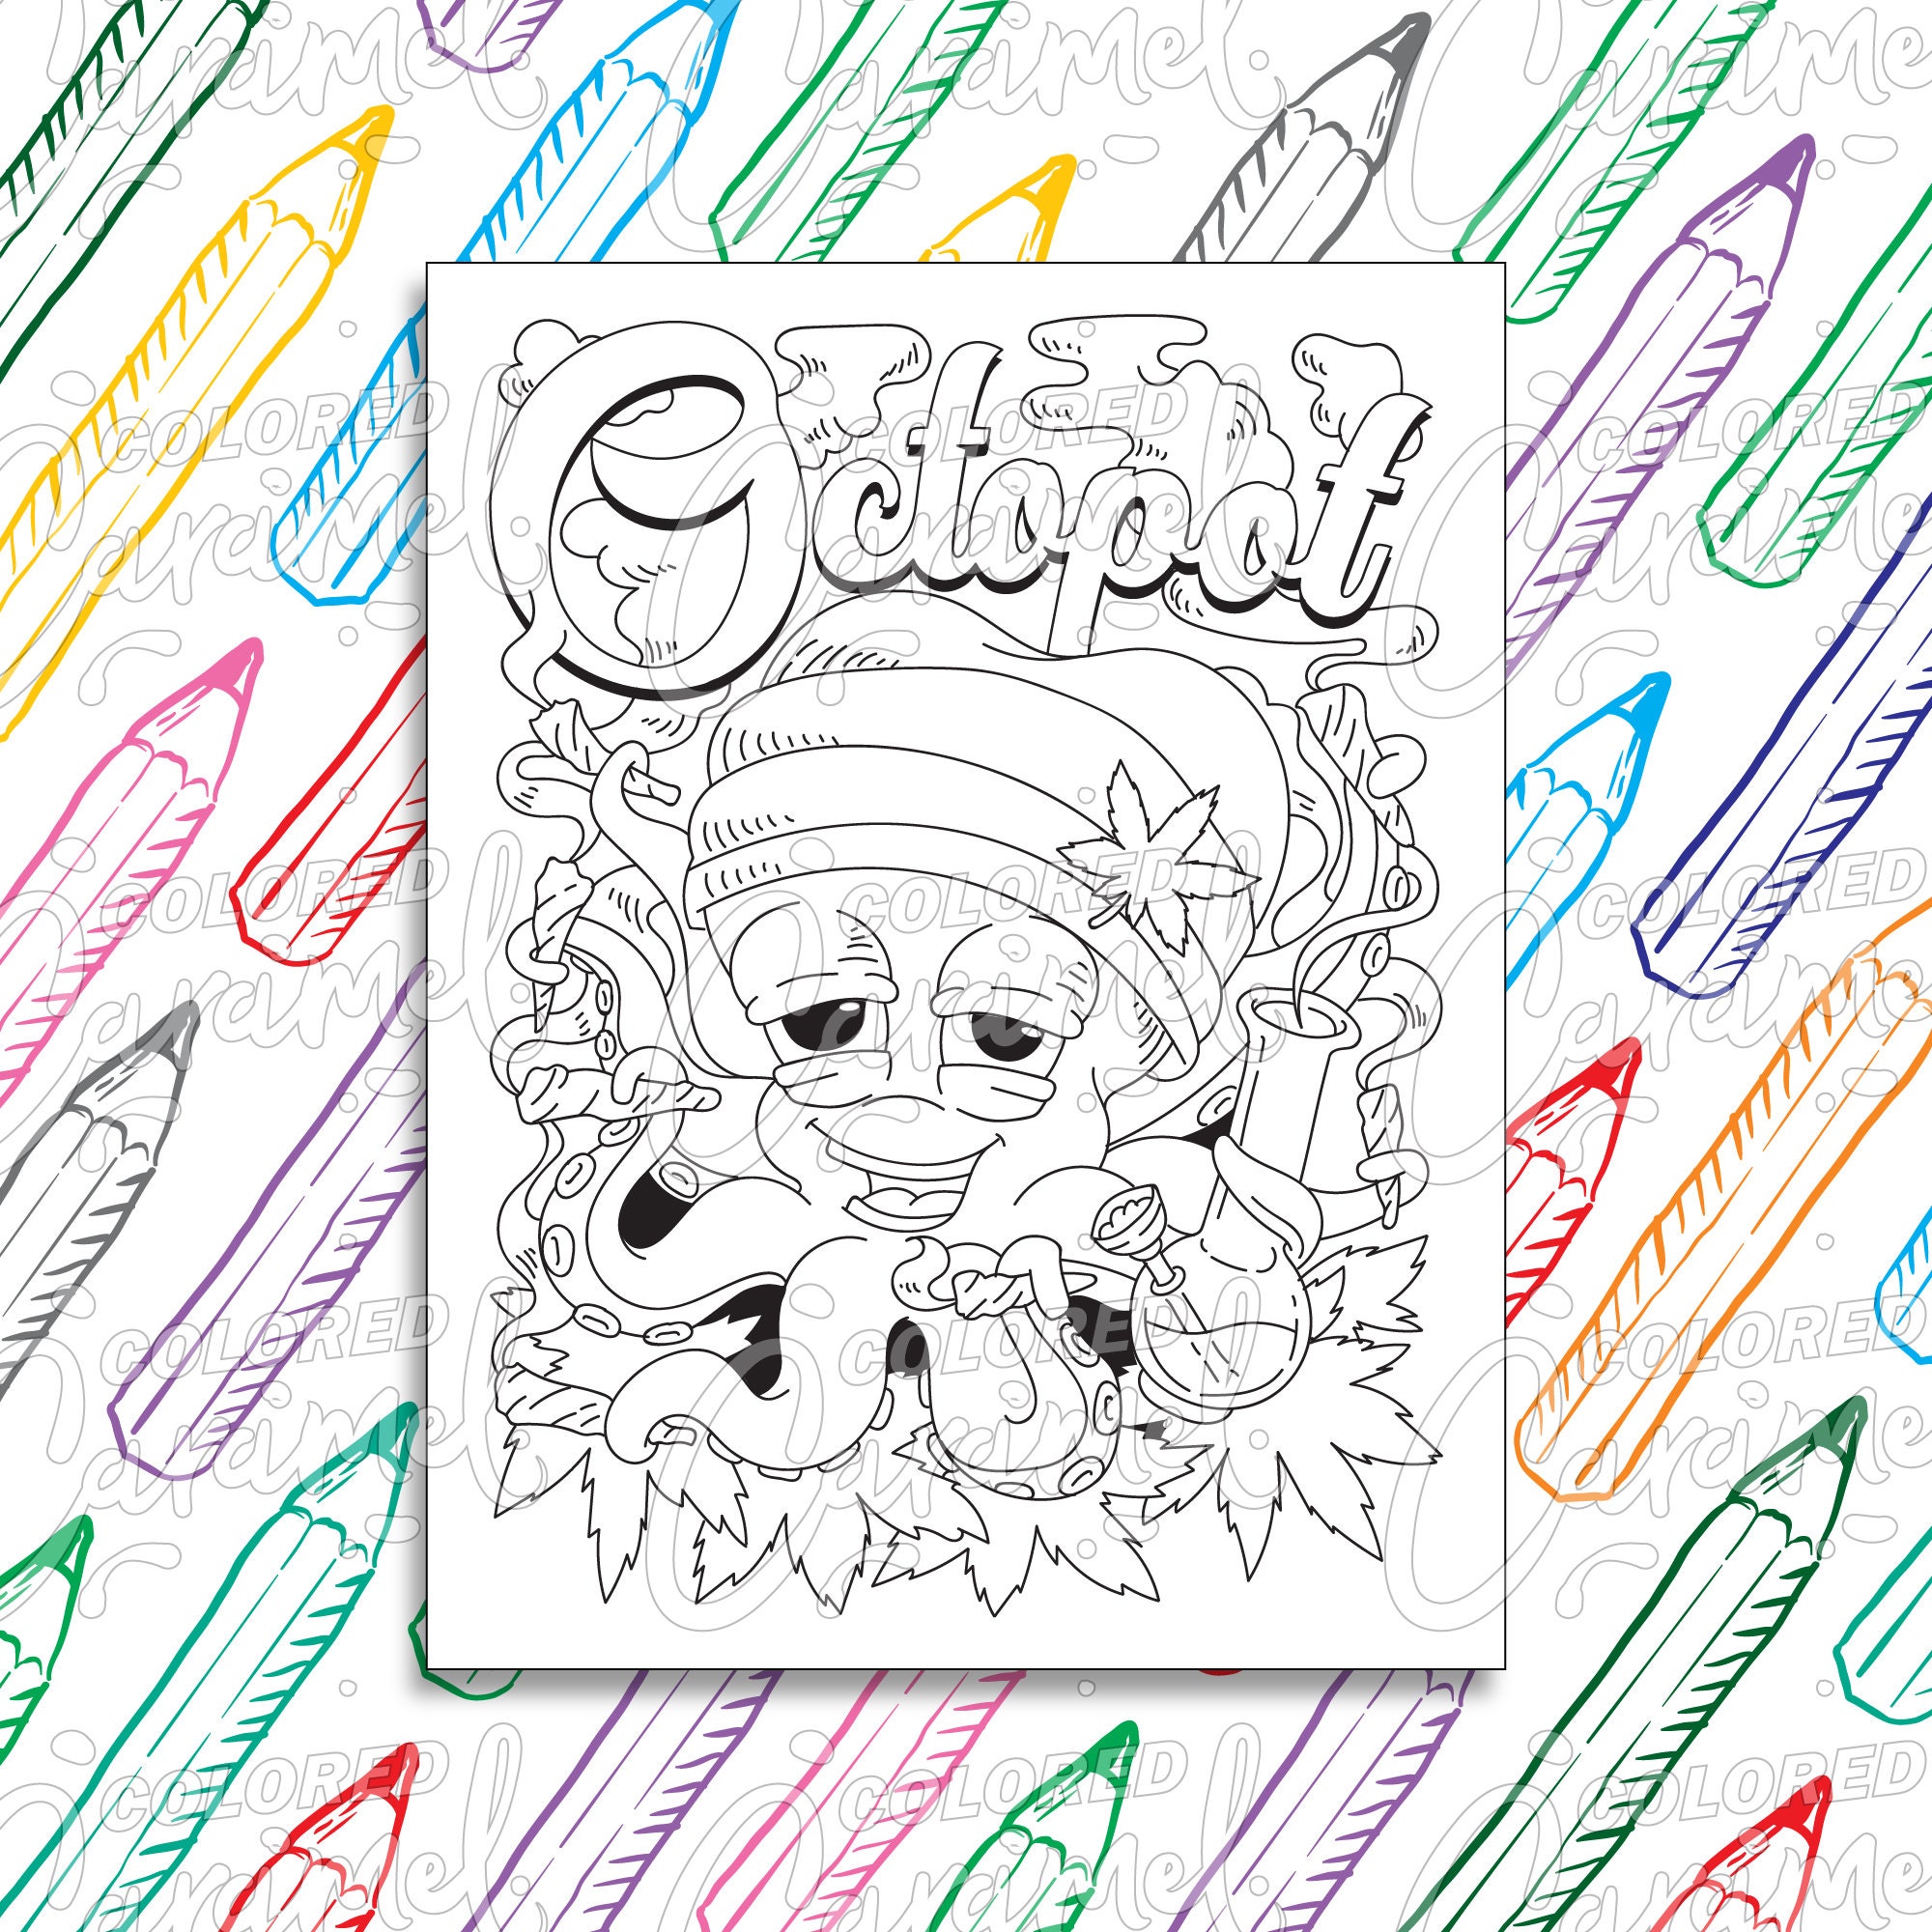 Stoner Coloring Page Digital Download PDF, Trippy, Funny and Cool Octopus Smoking Weed, Printable Psychedelic Drawing & Illustration